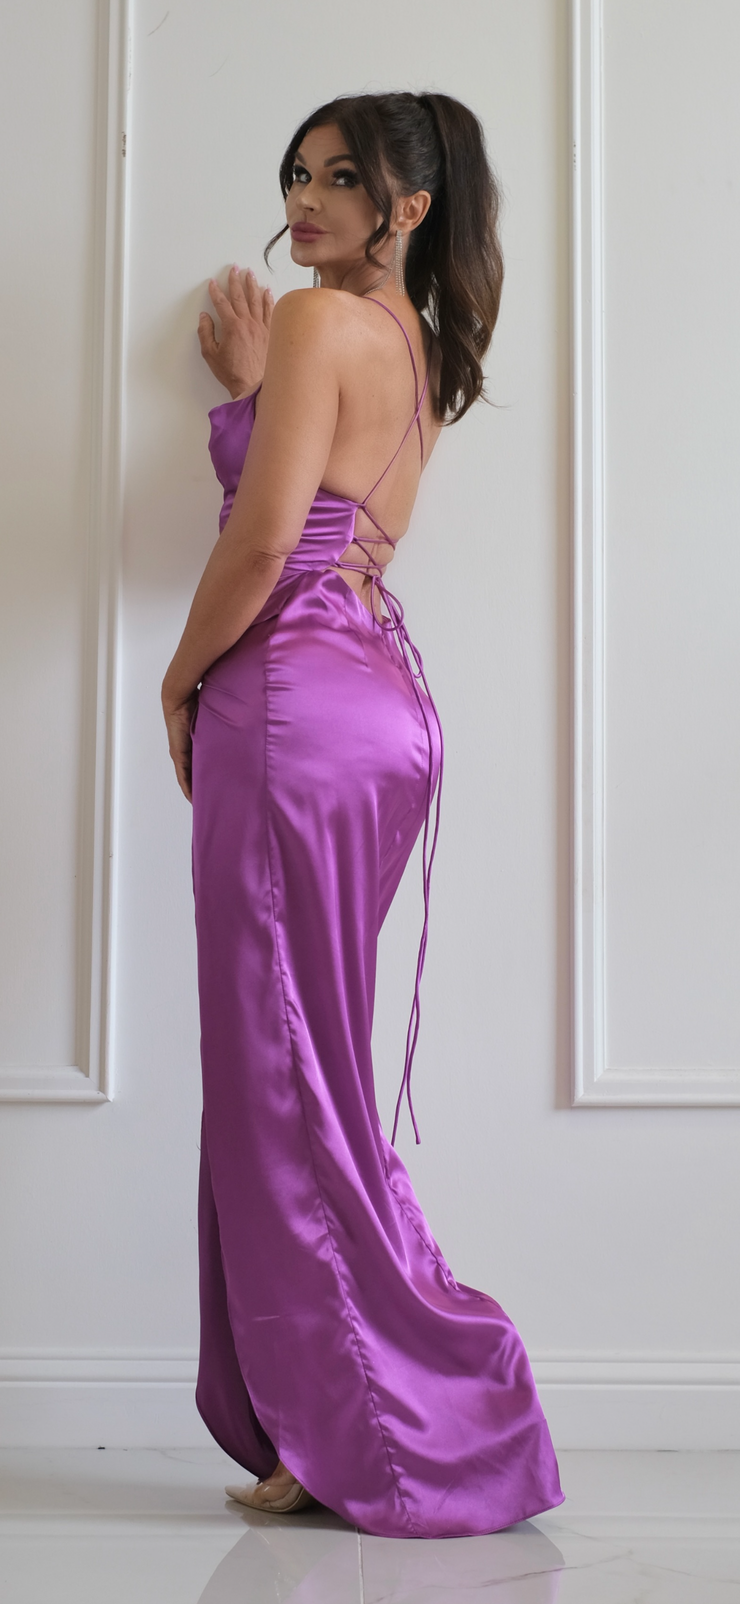 The Hailey Orchid Satin Front Twist Formal